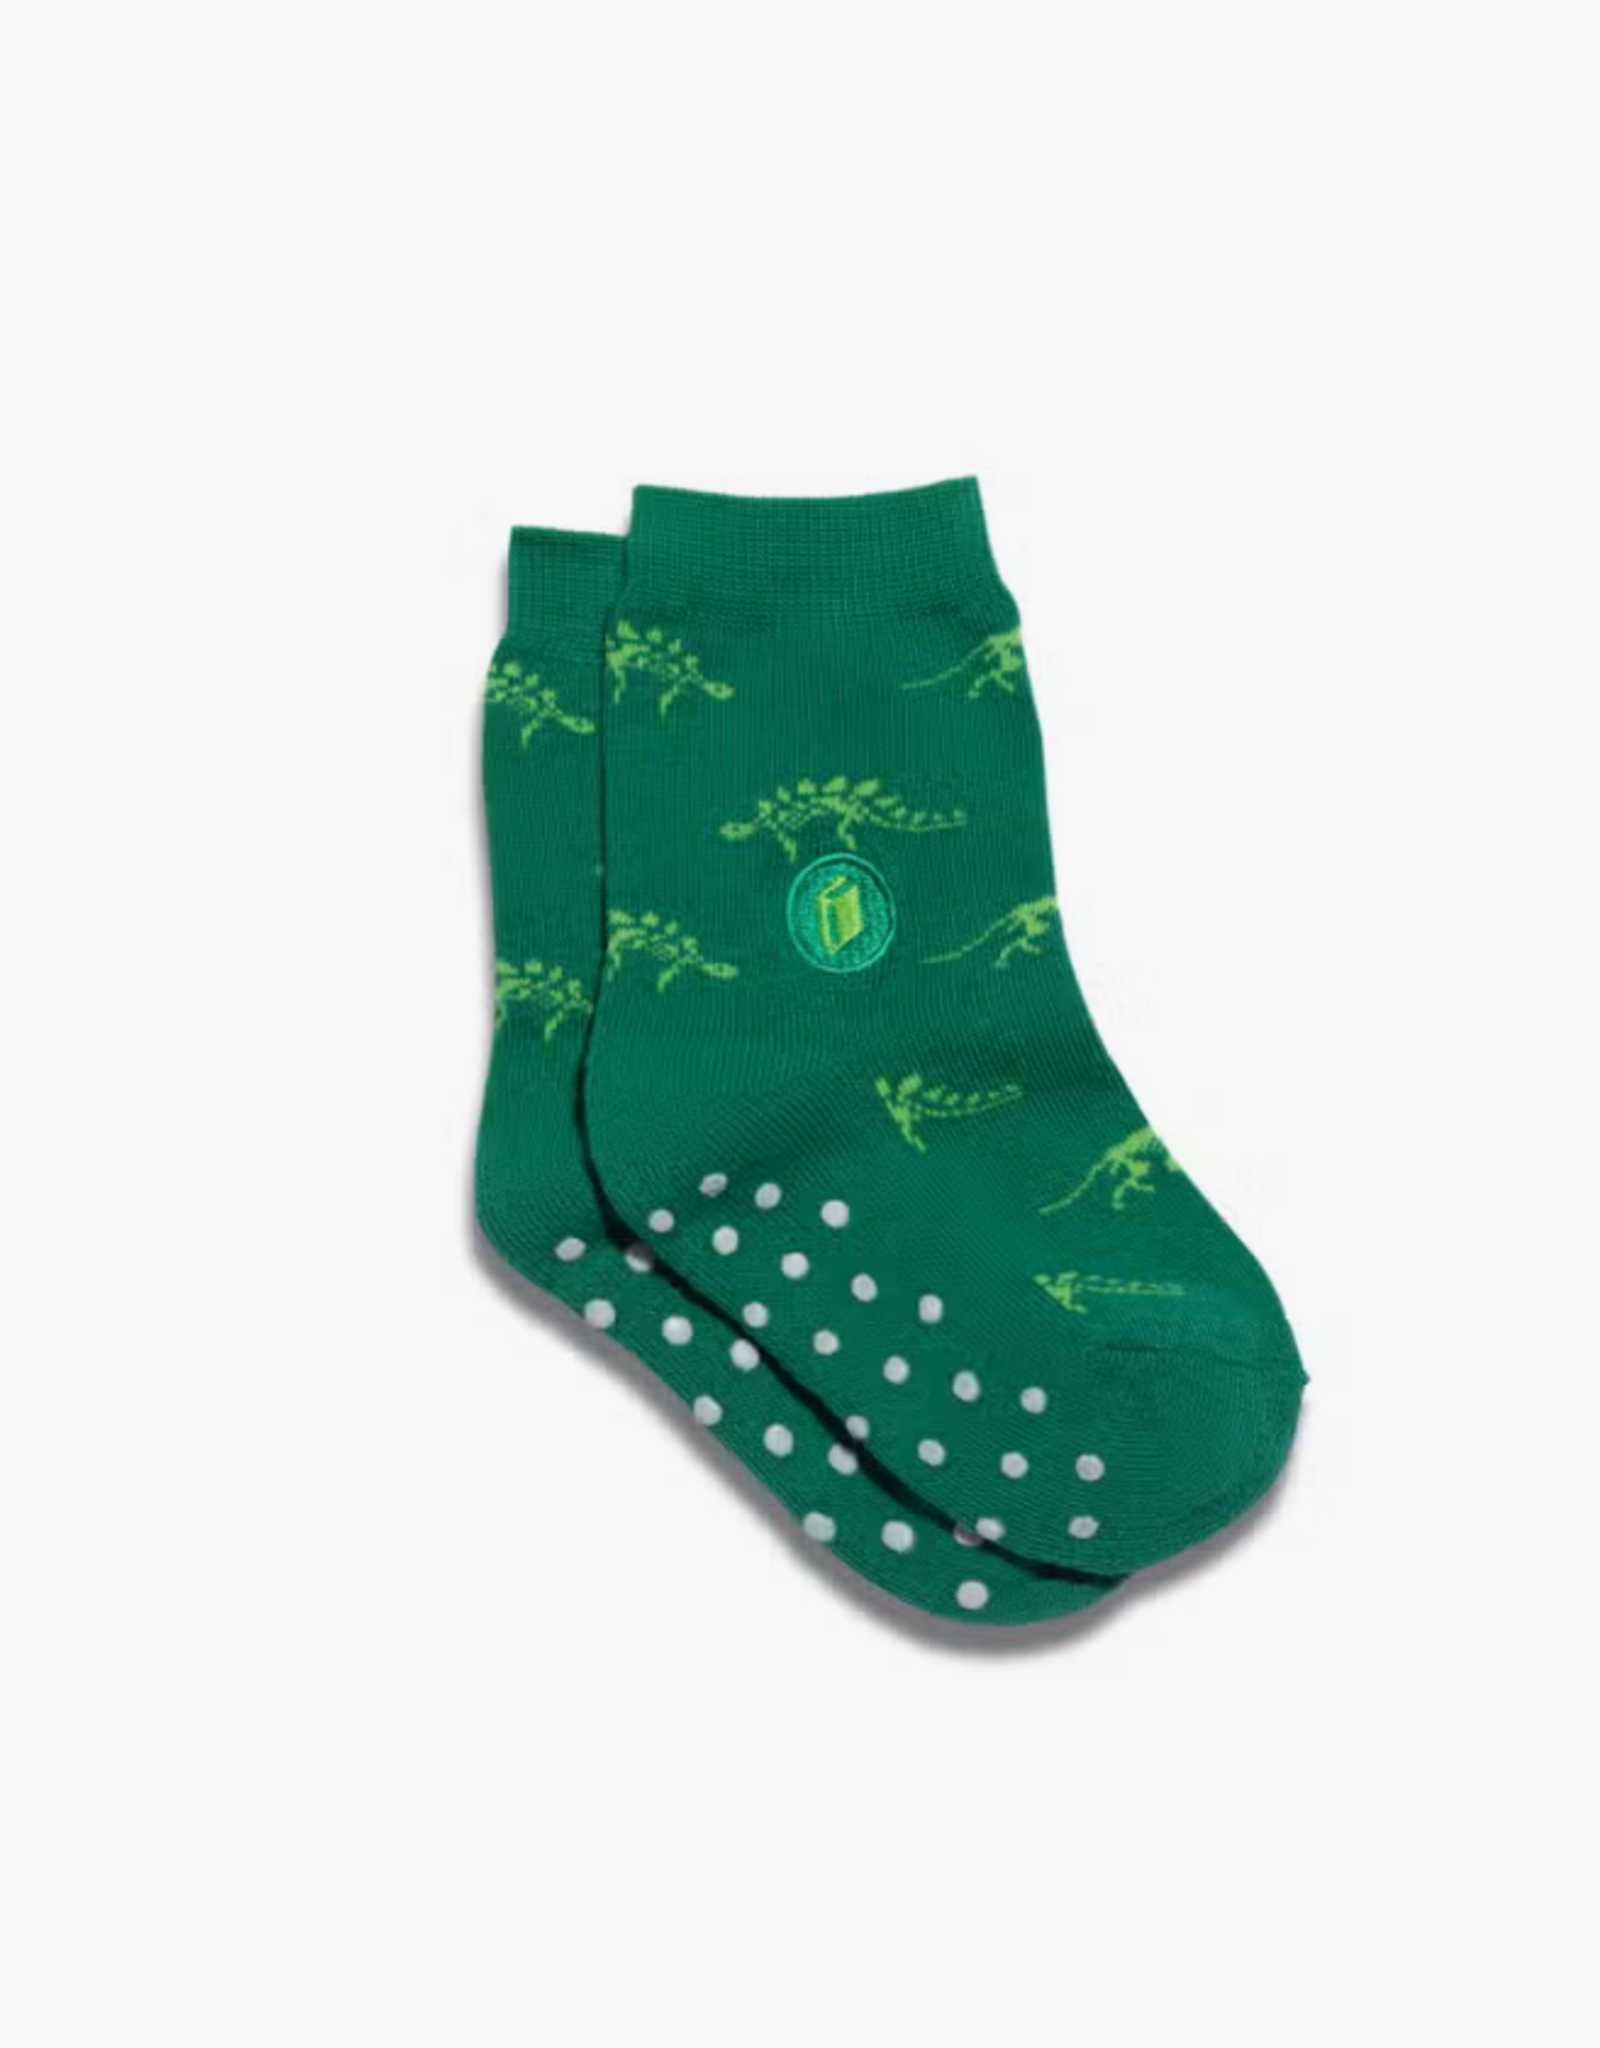 Conscious Step Kids Socks that Give Books